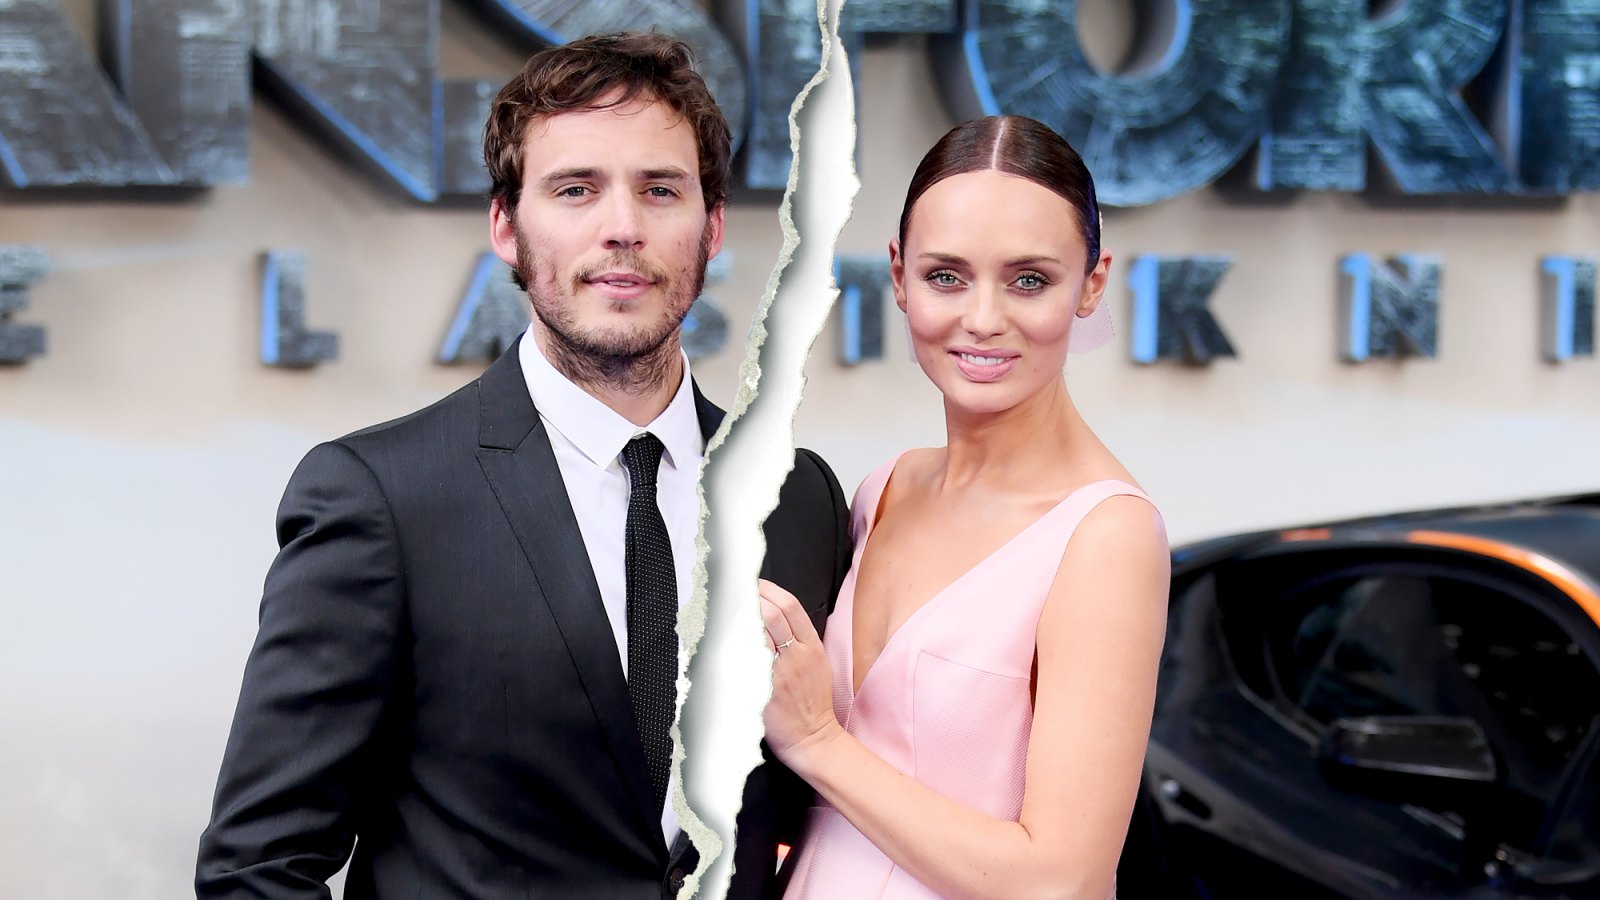 Sam-Claflin-and-Wife-Laura-Haddock-Split-After-6-Years-of-Marriage